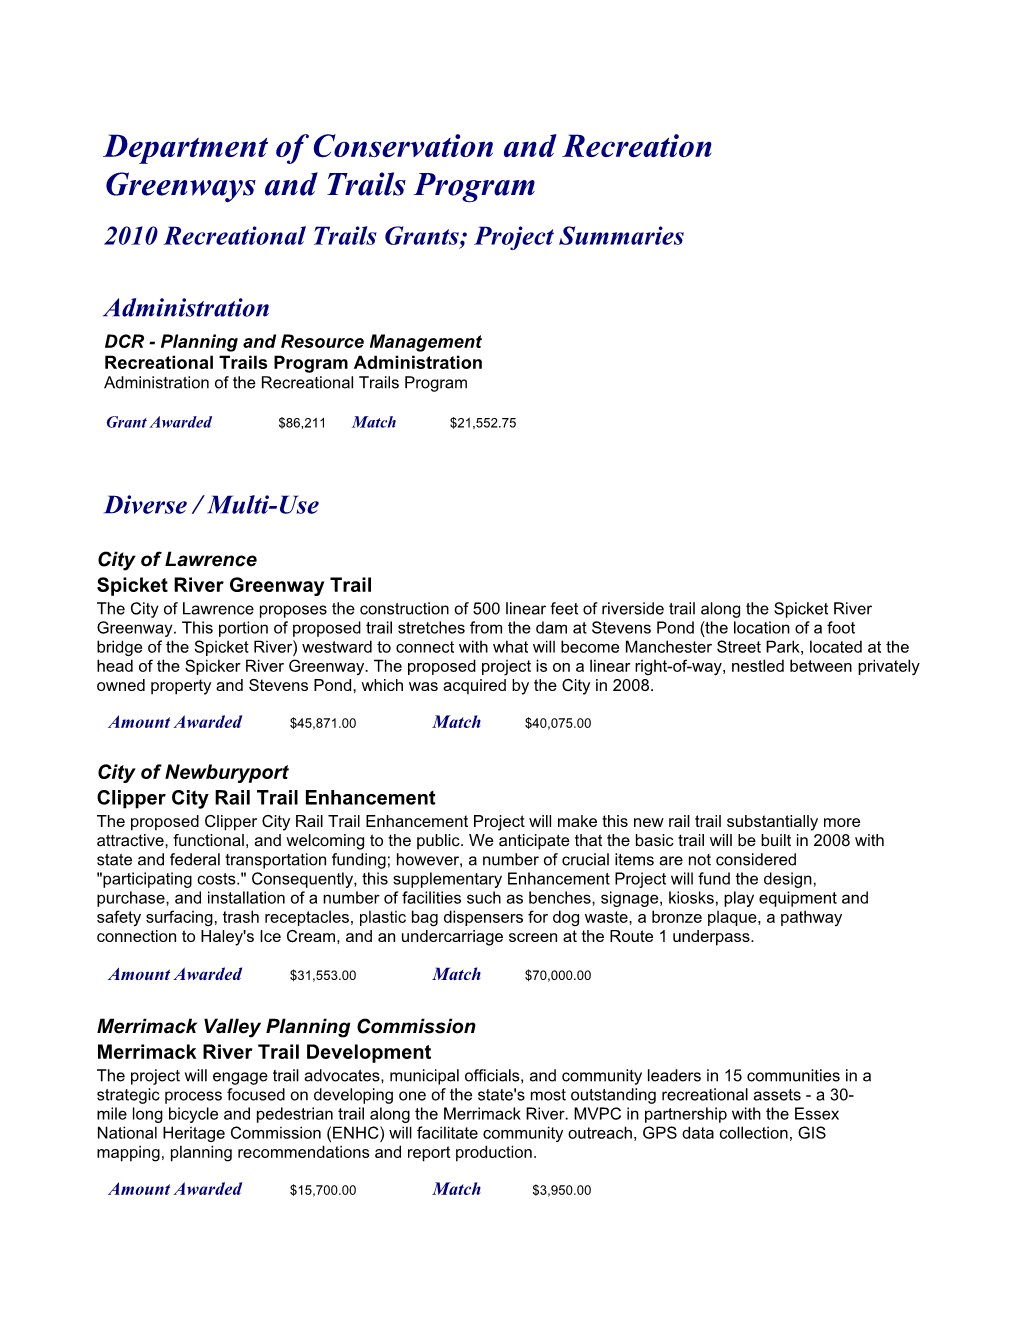 Department of Conservation and Recreation Greenways and Trails Program